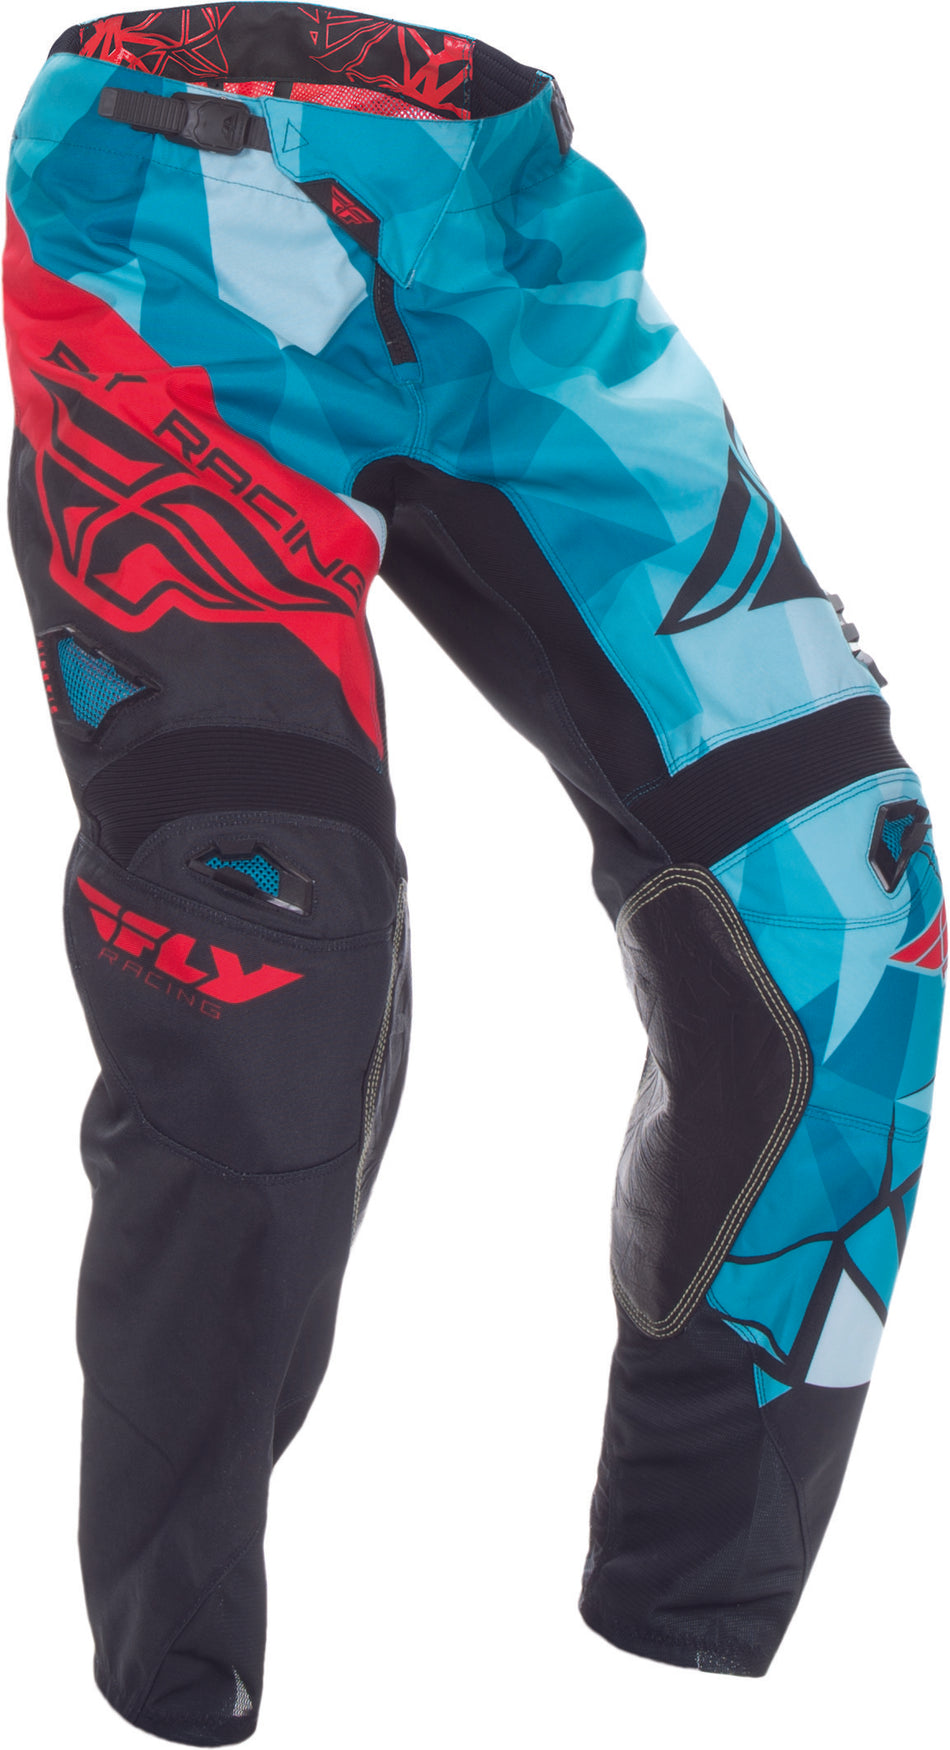 FLY RACING Kinetic Crux Pant Teal/Red Sz 40 370-53940